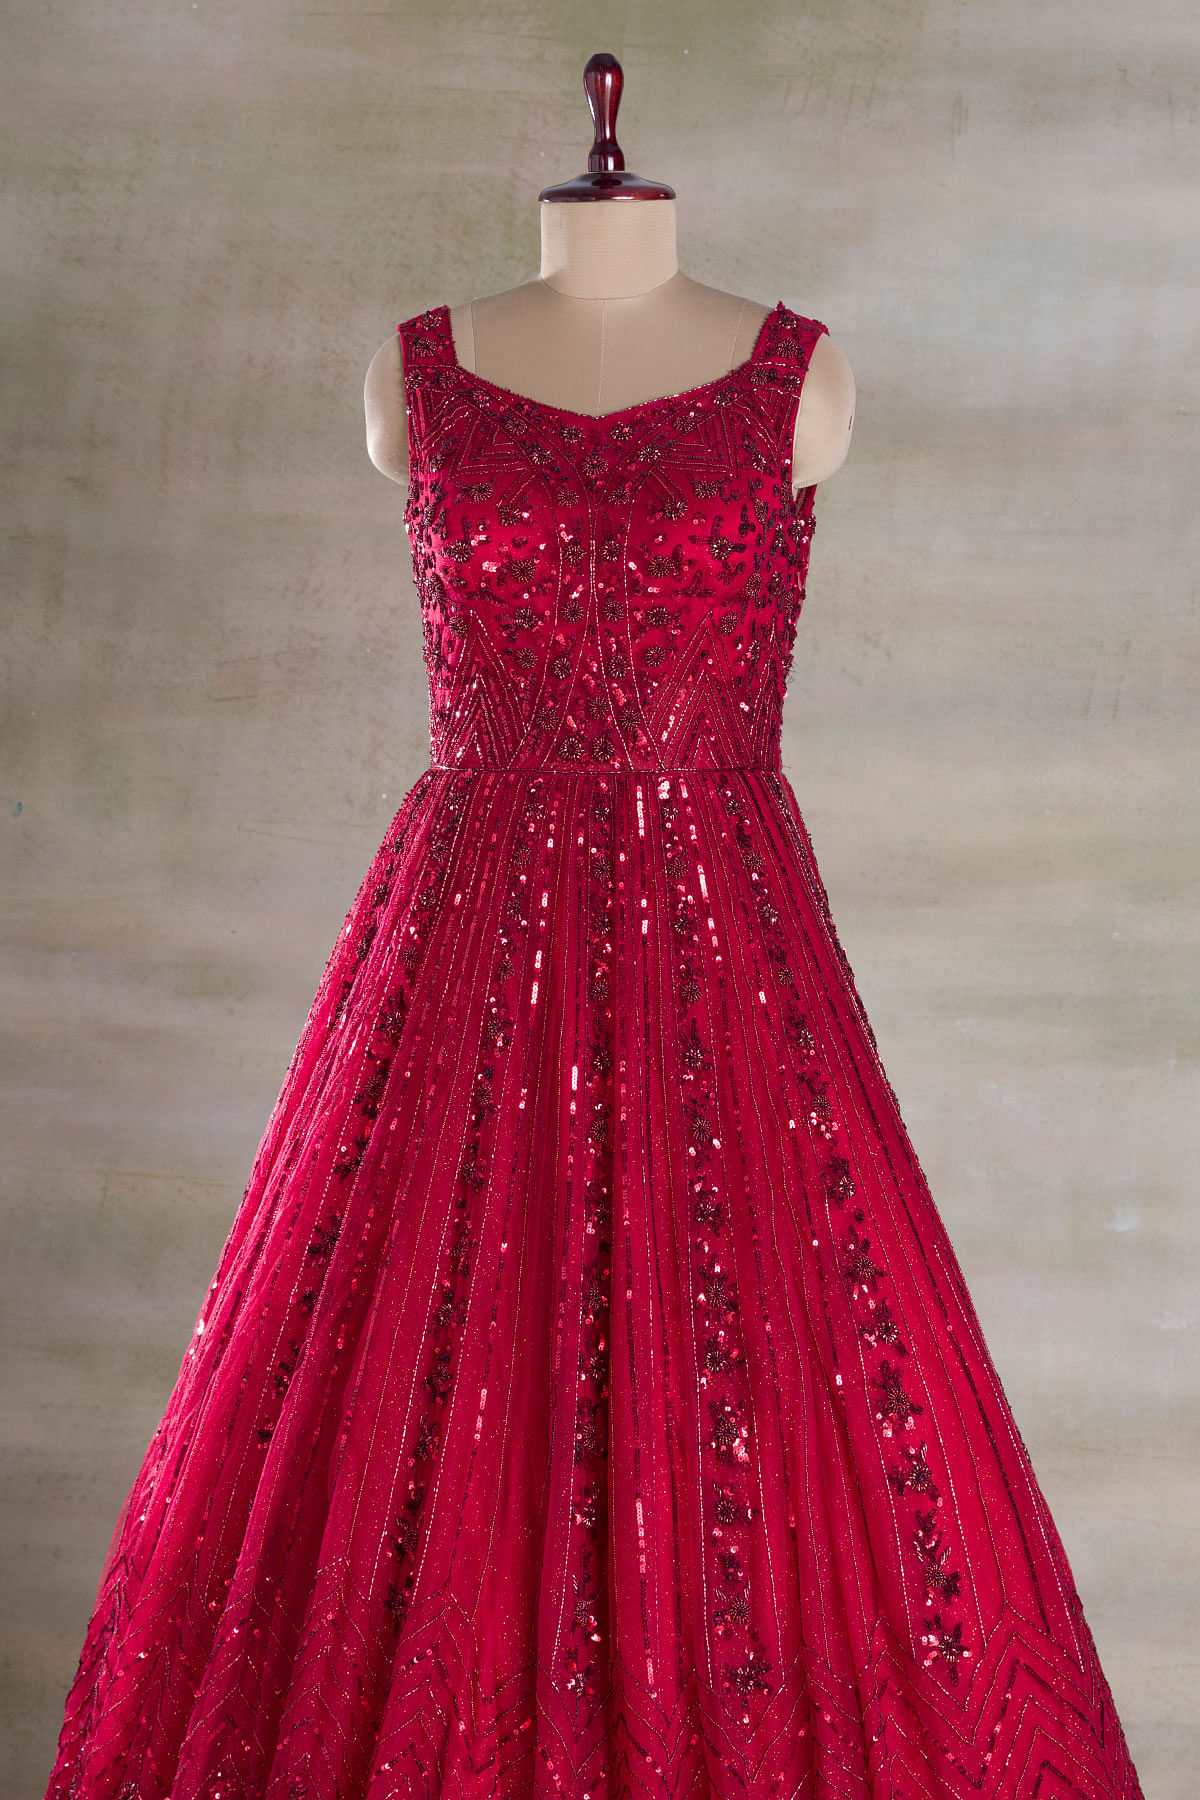 Red Gown Designs for that perfect look this wedding season